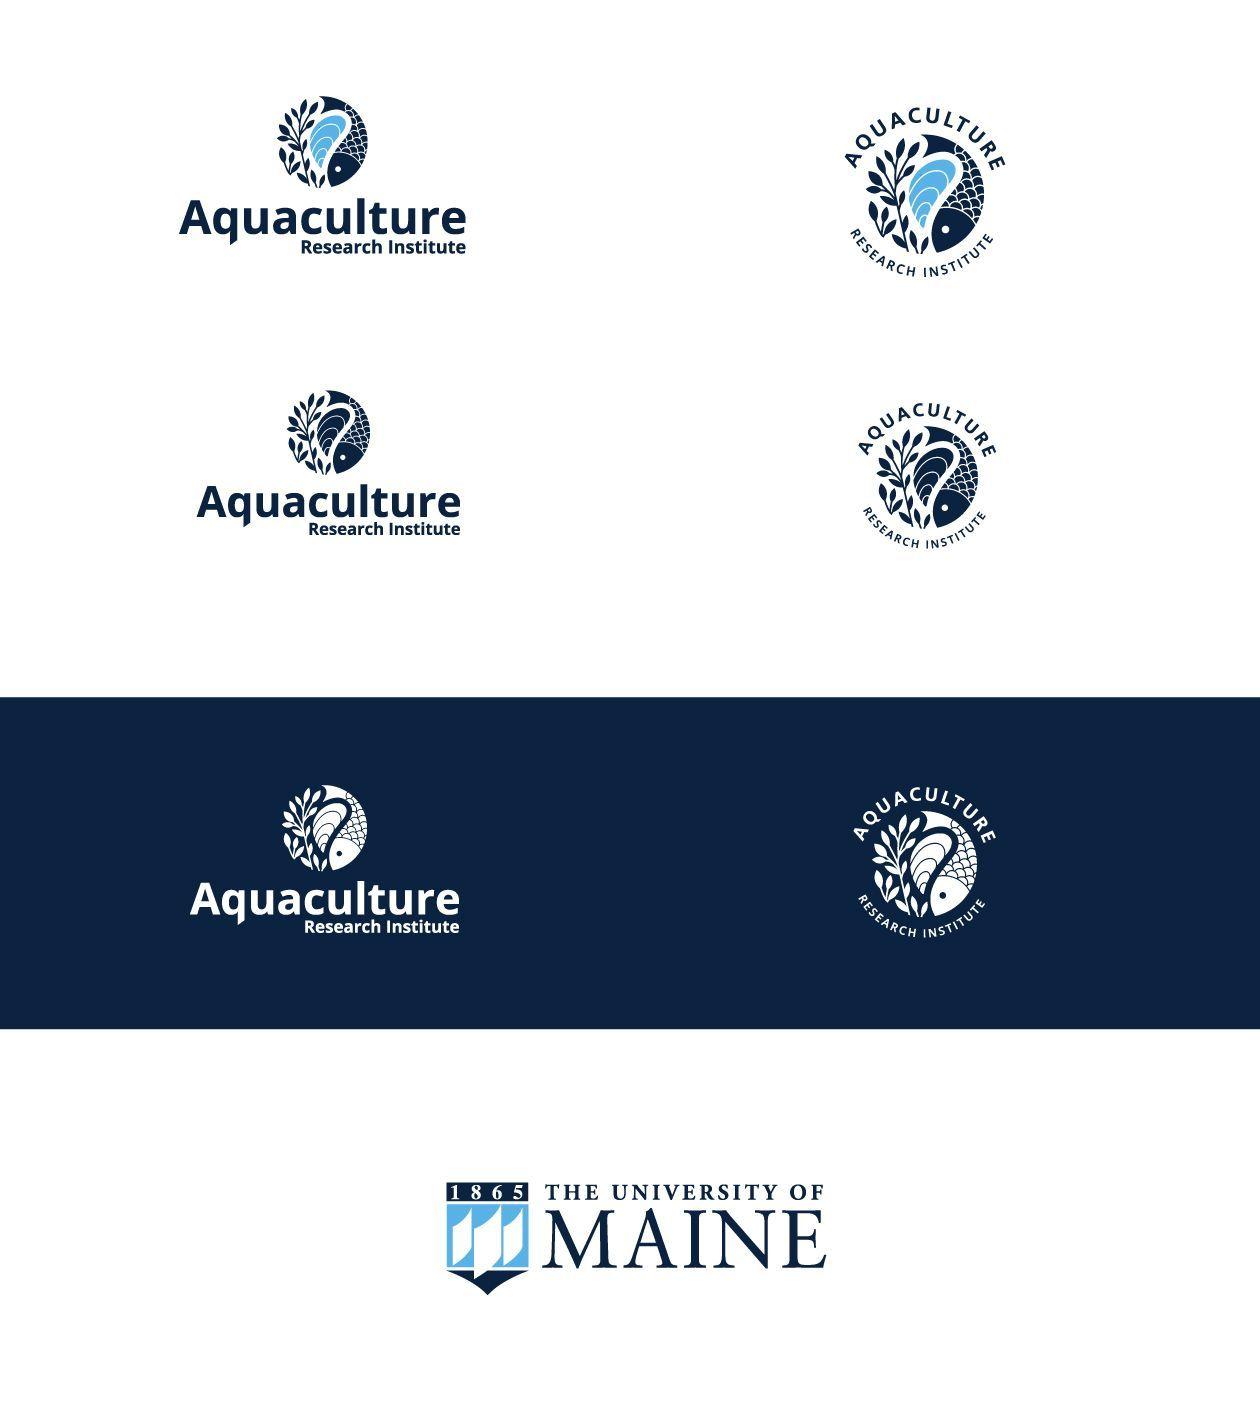 Ure Logo - Pin by crystal chappell on Logos I Like | Fish logo, Logos, Research